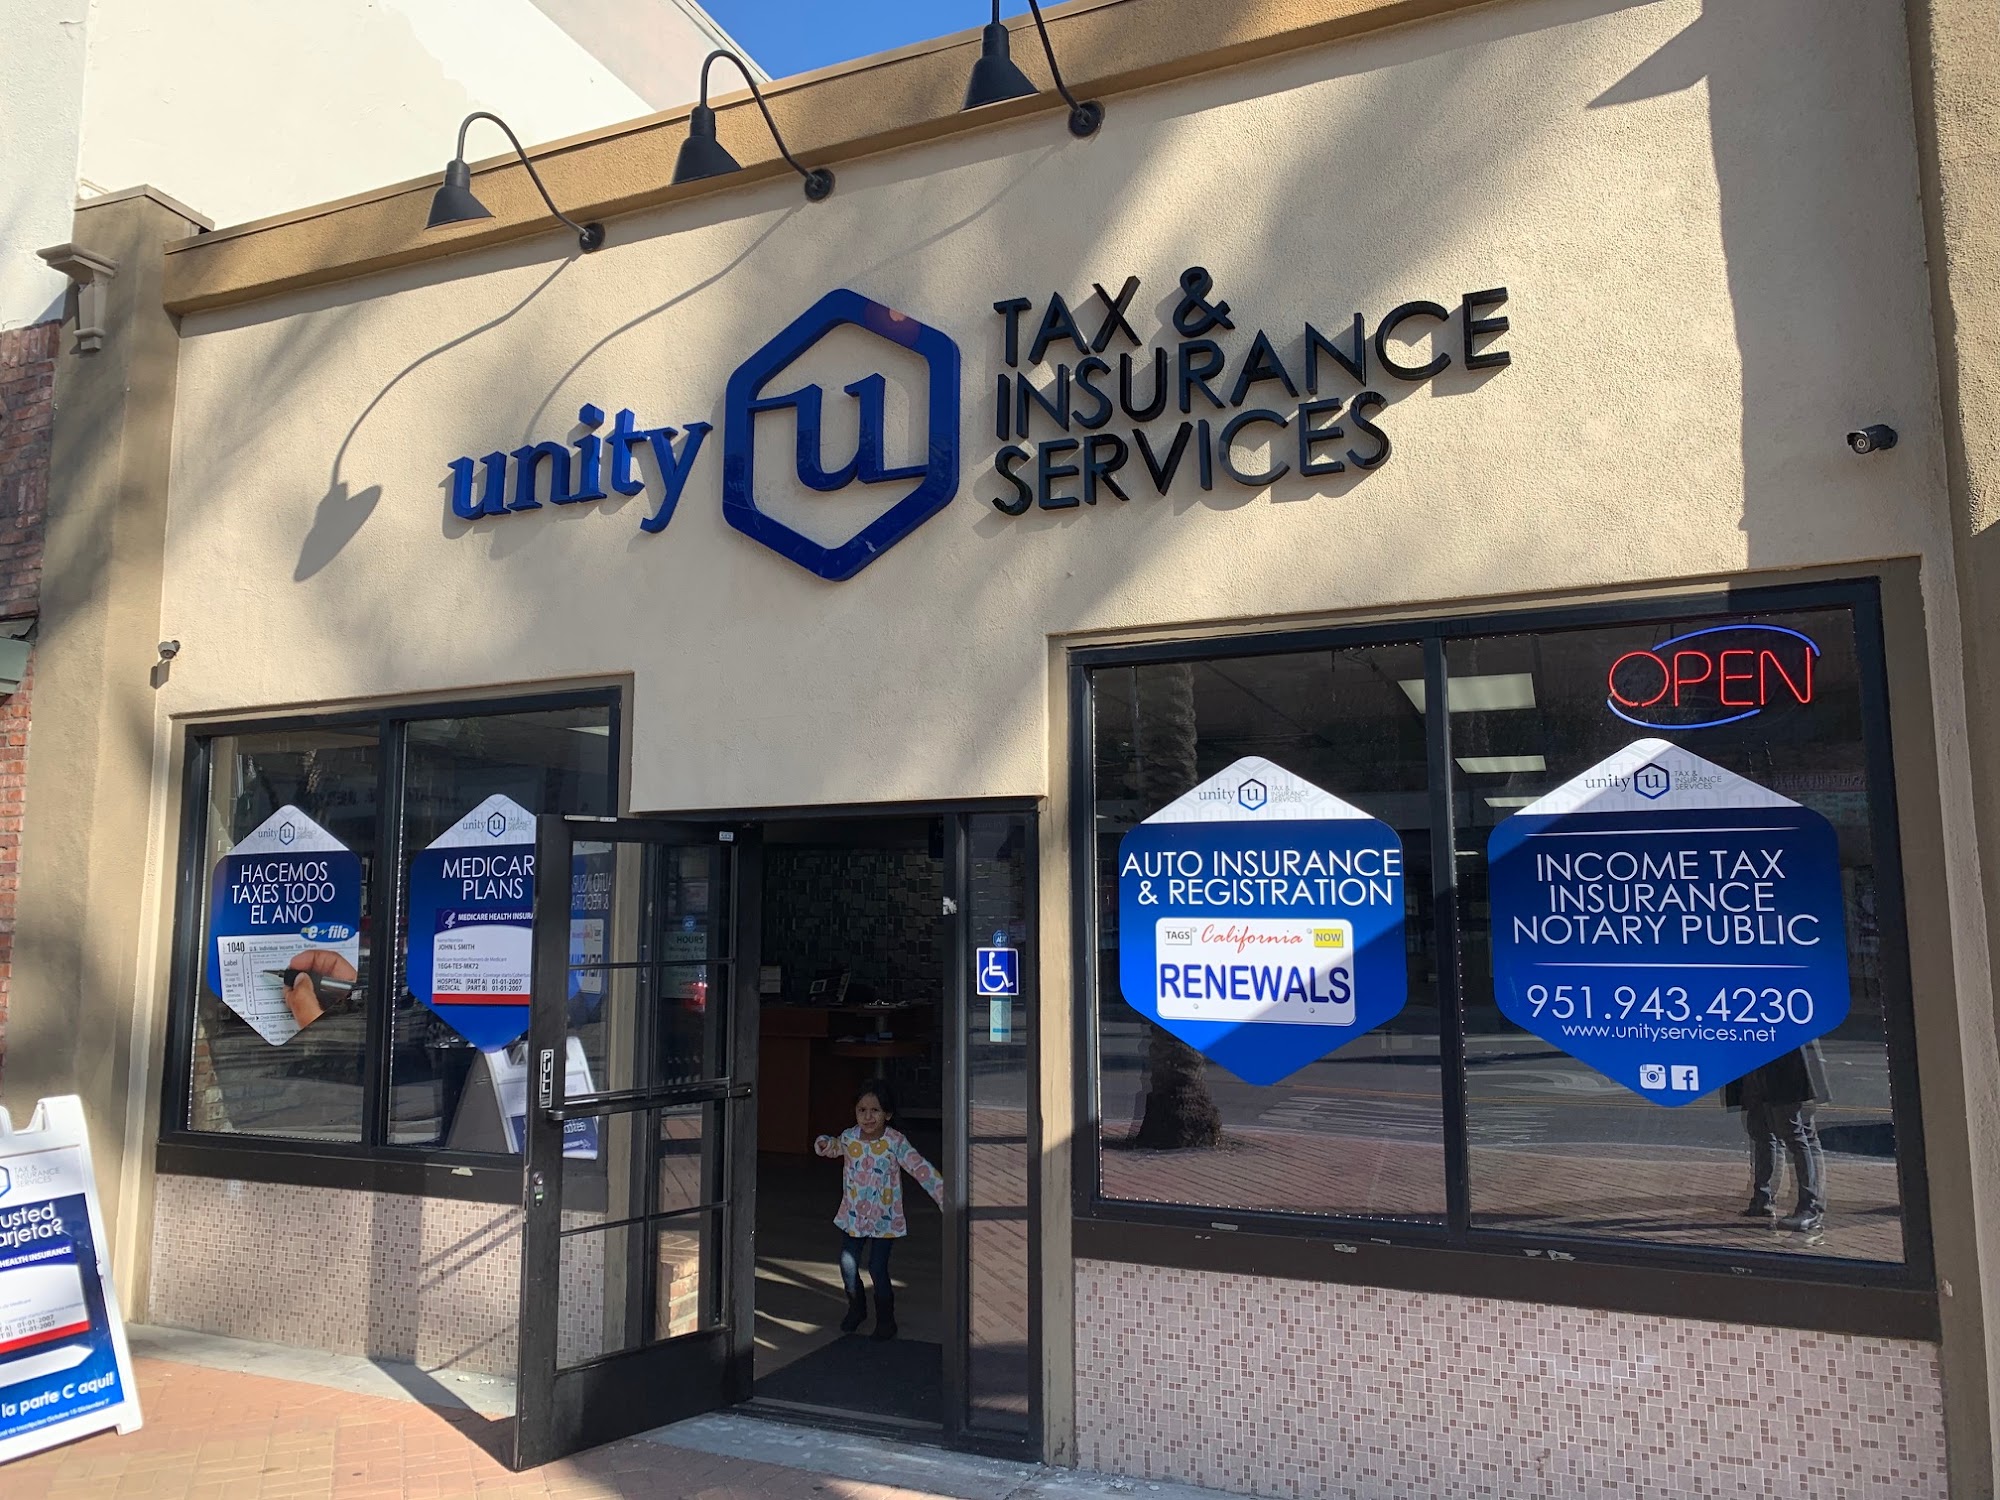 Unity Tax & Insurance Services